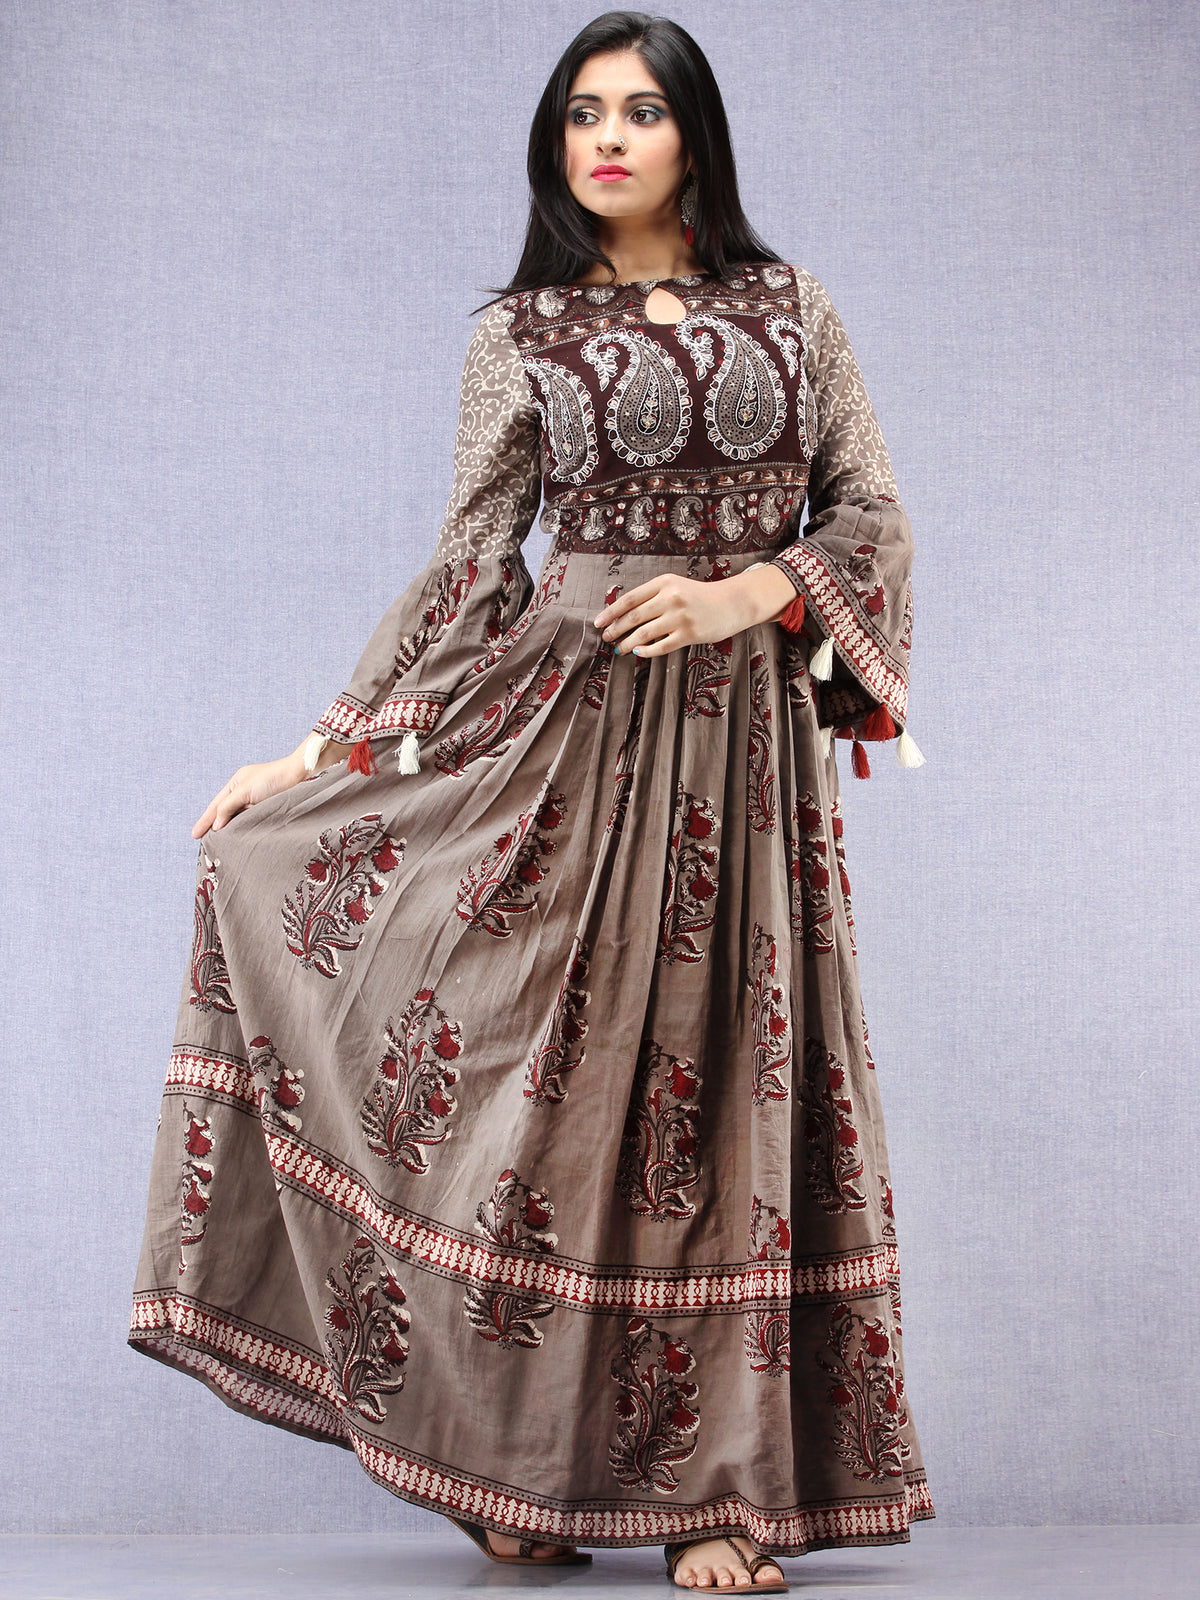 Naaz Asmaa - Hand Block Mughal Printed Long Cotton Embroidered Dress - DS105F001